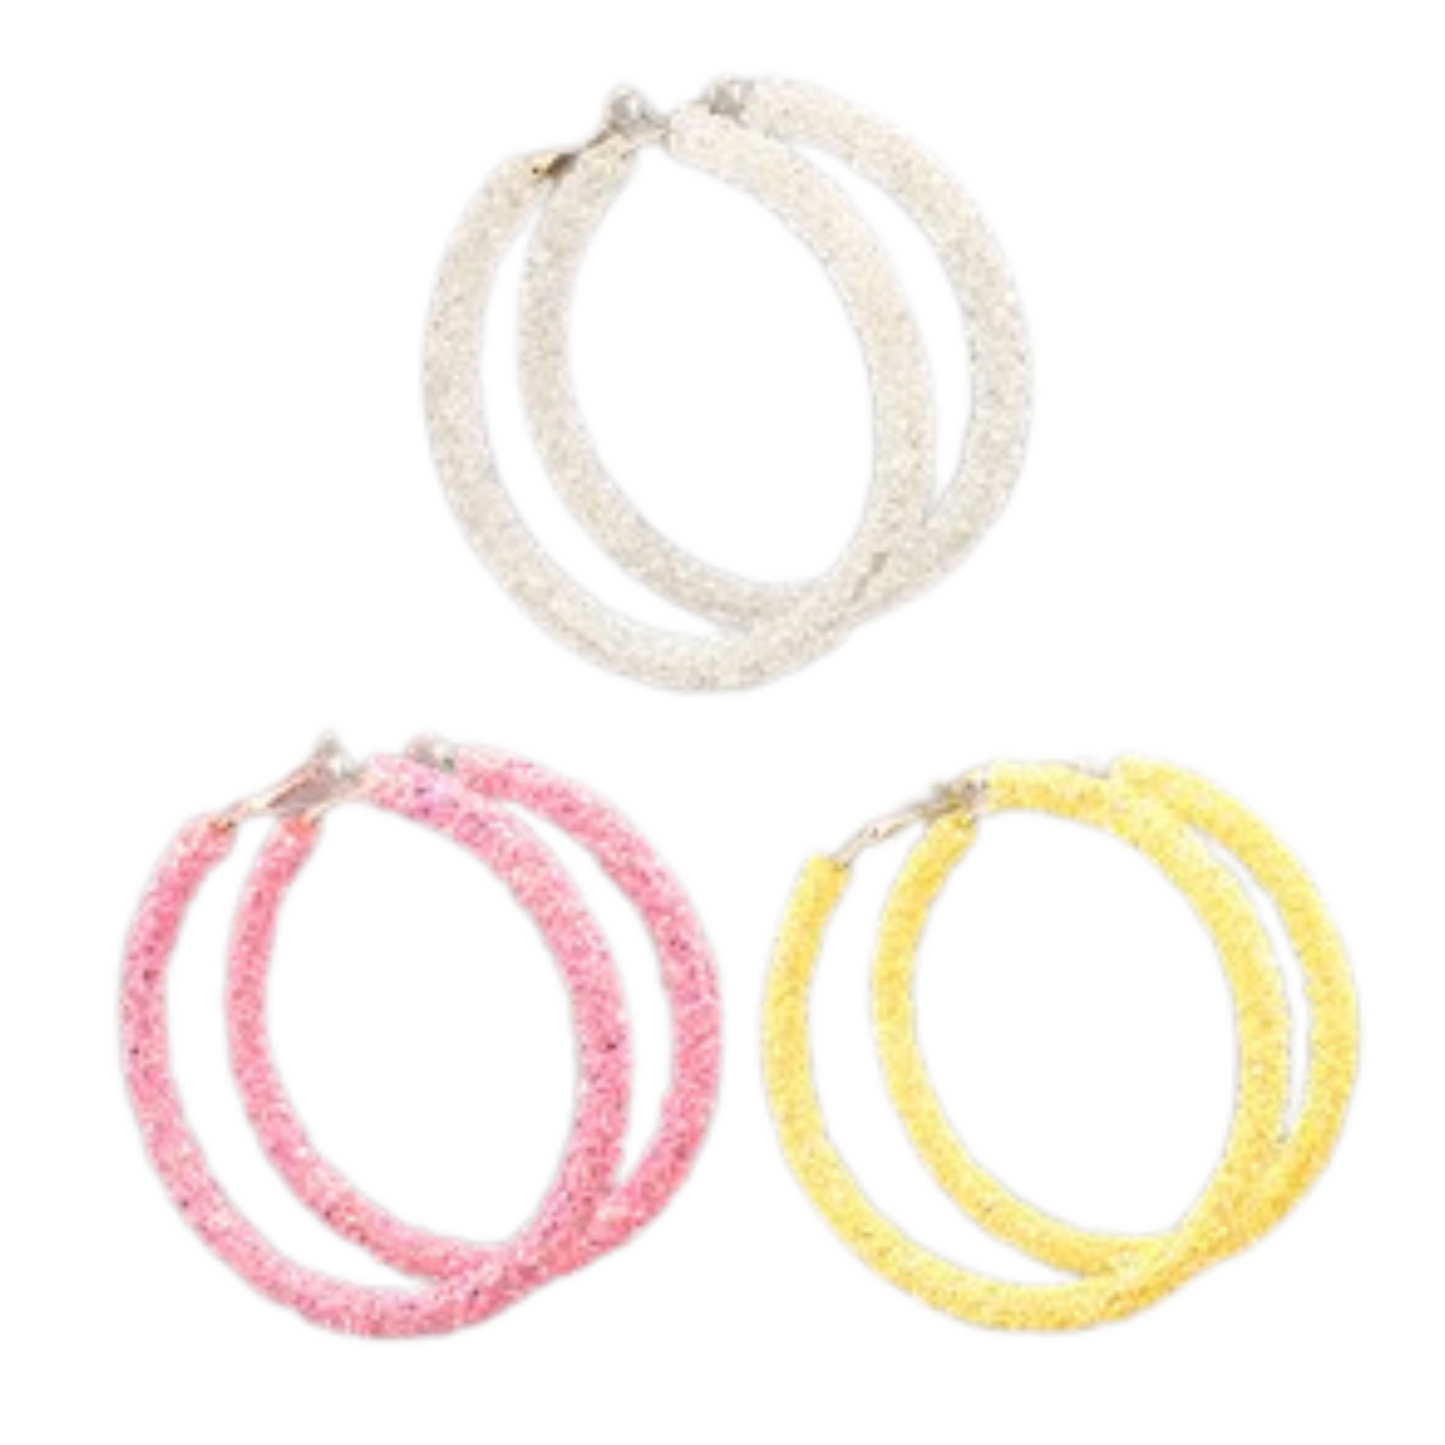 The Large Crystal Cluster Hoops are perfect for any occasion. These lightweight earrings feature iconic crystal cluster accents in three colors: white, yellow, and pink. For a timeless and elegant look, these are sure to make a statement.